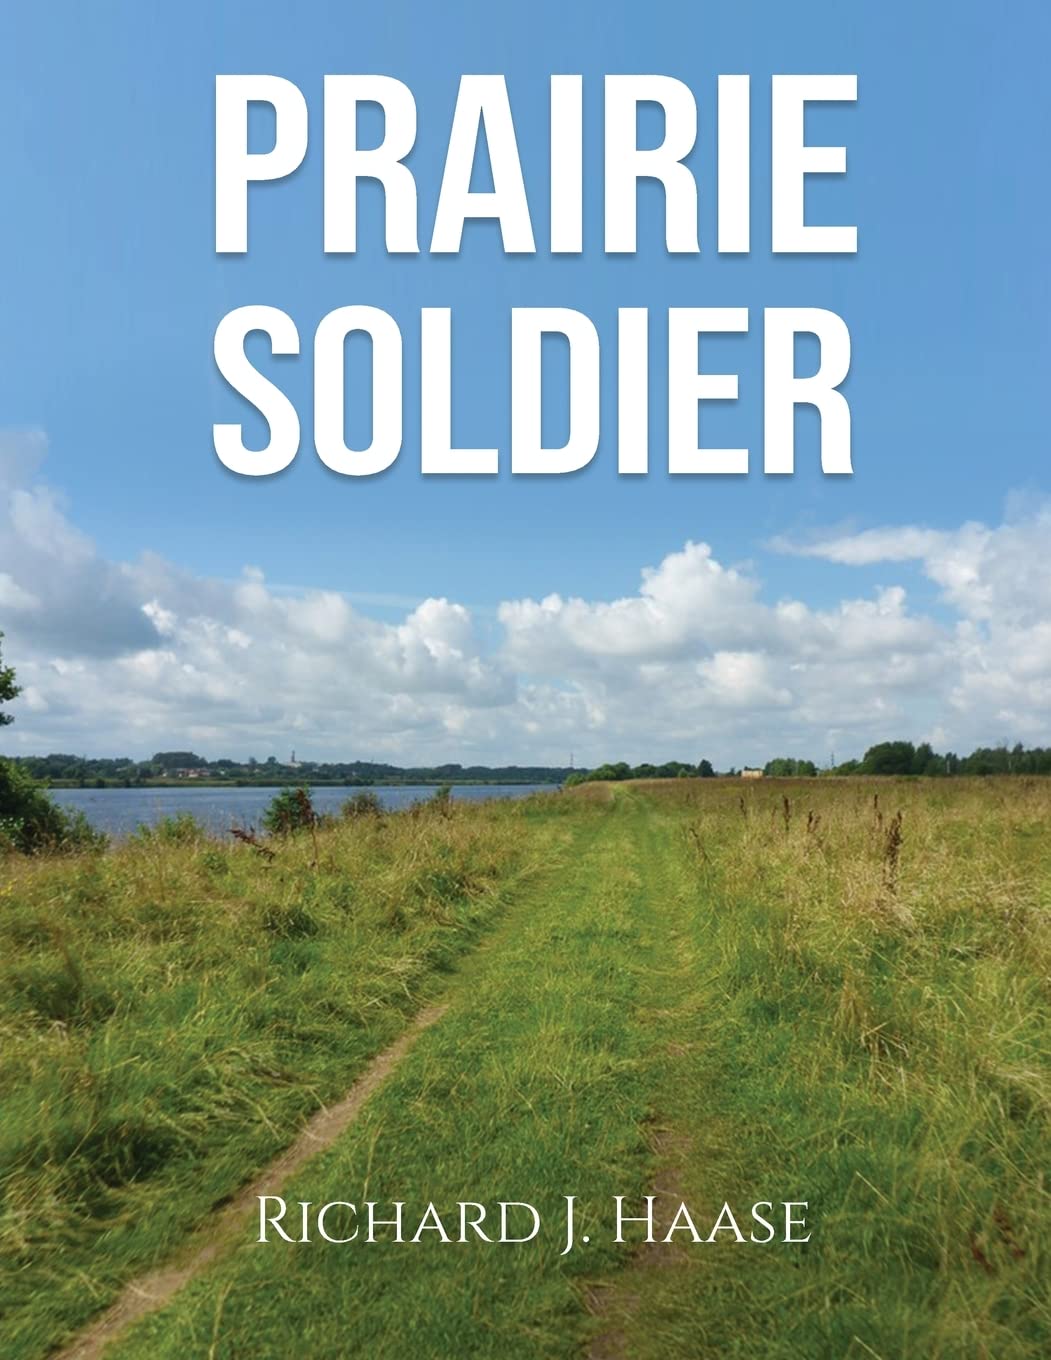 Richard J. Haase’s New Book “Prairie Soldier” Is a Gritty and Compelling Tale of a Young Man’s Journey Through the Korean War 11